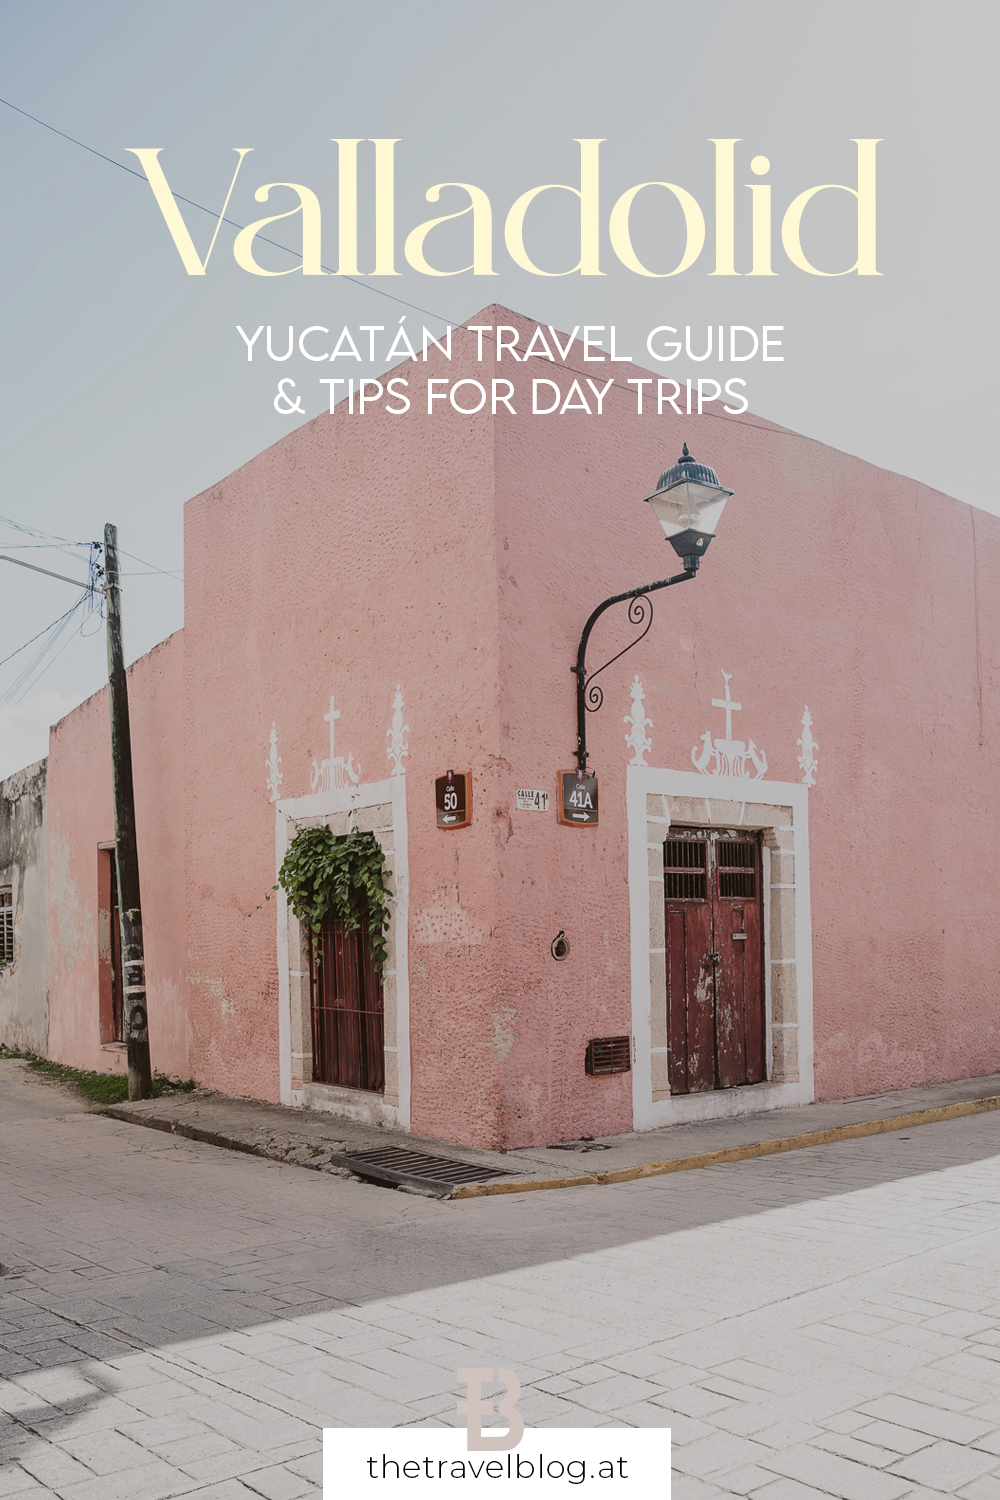 Travel guide for Valladolid - with day trips, restaurants, hotels and Chichén-Itzá